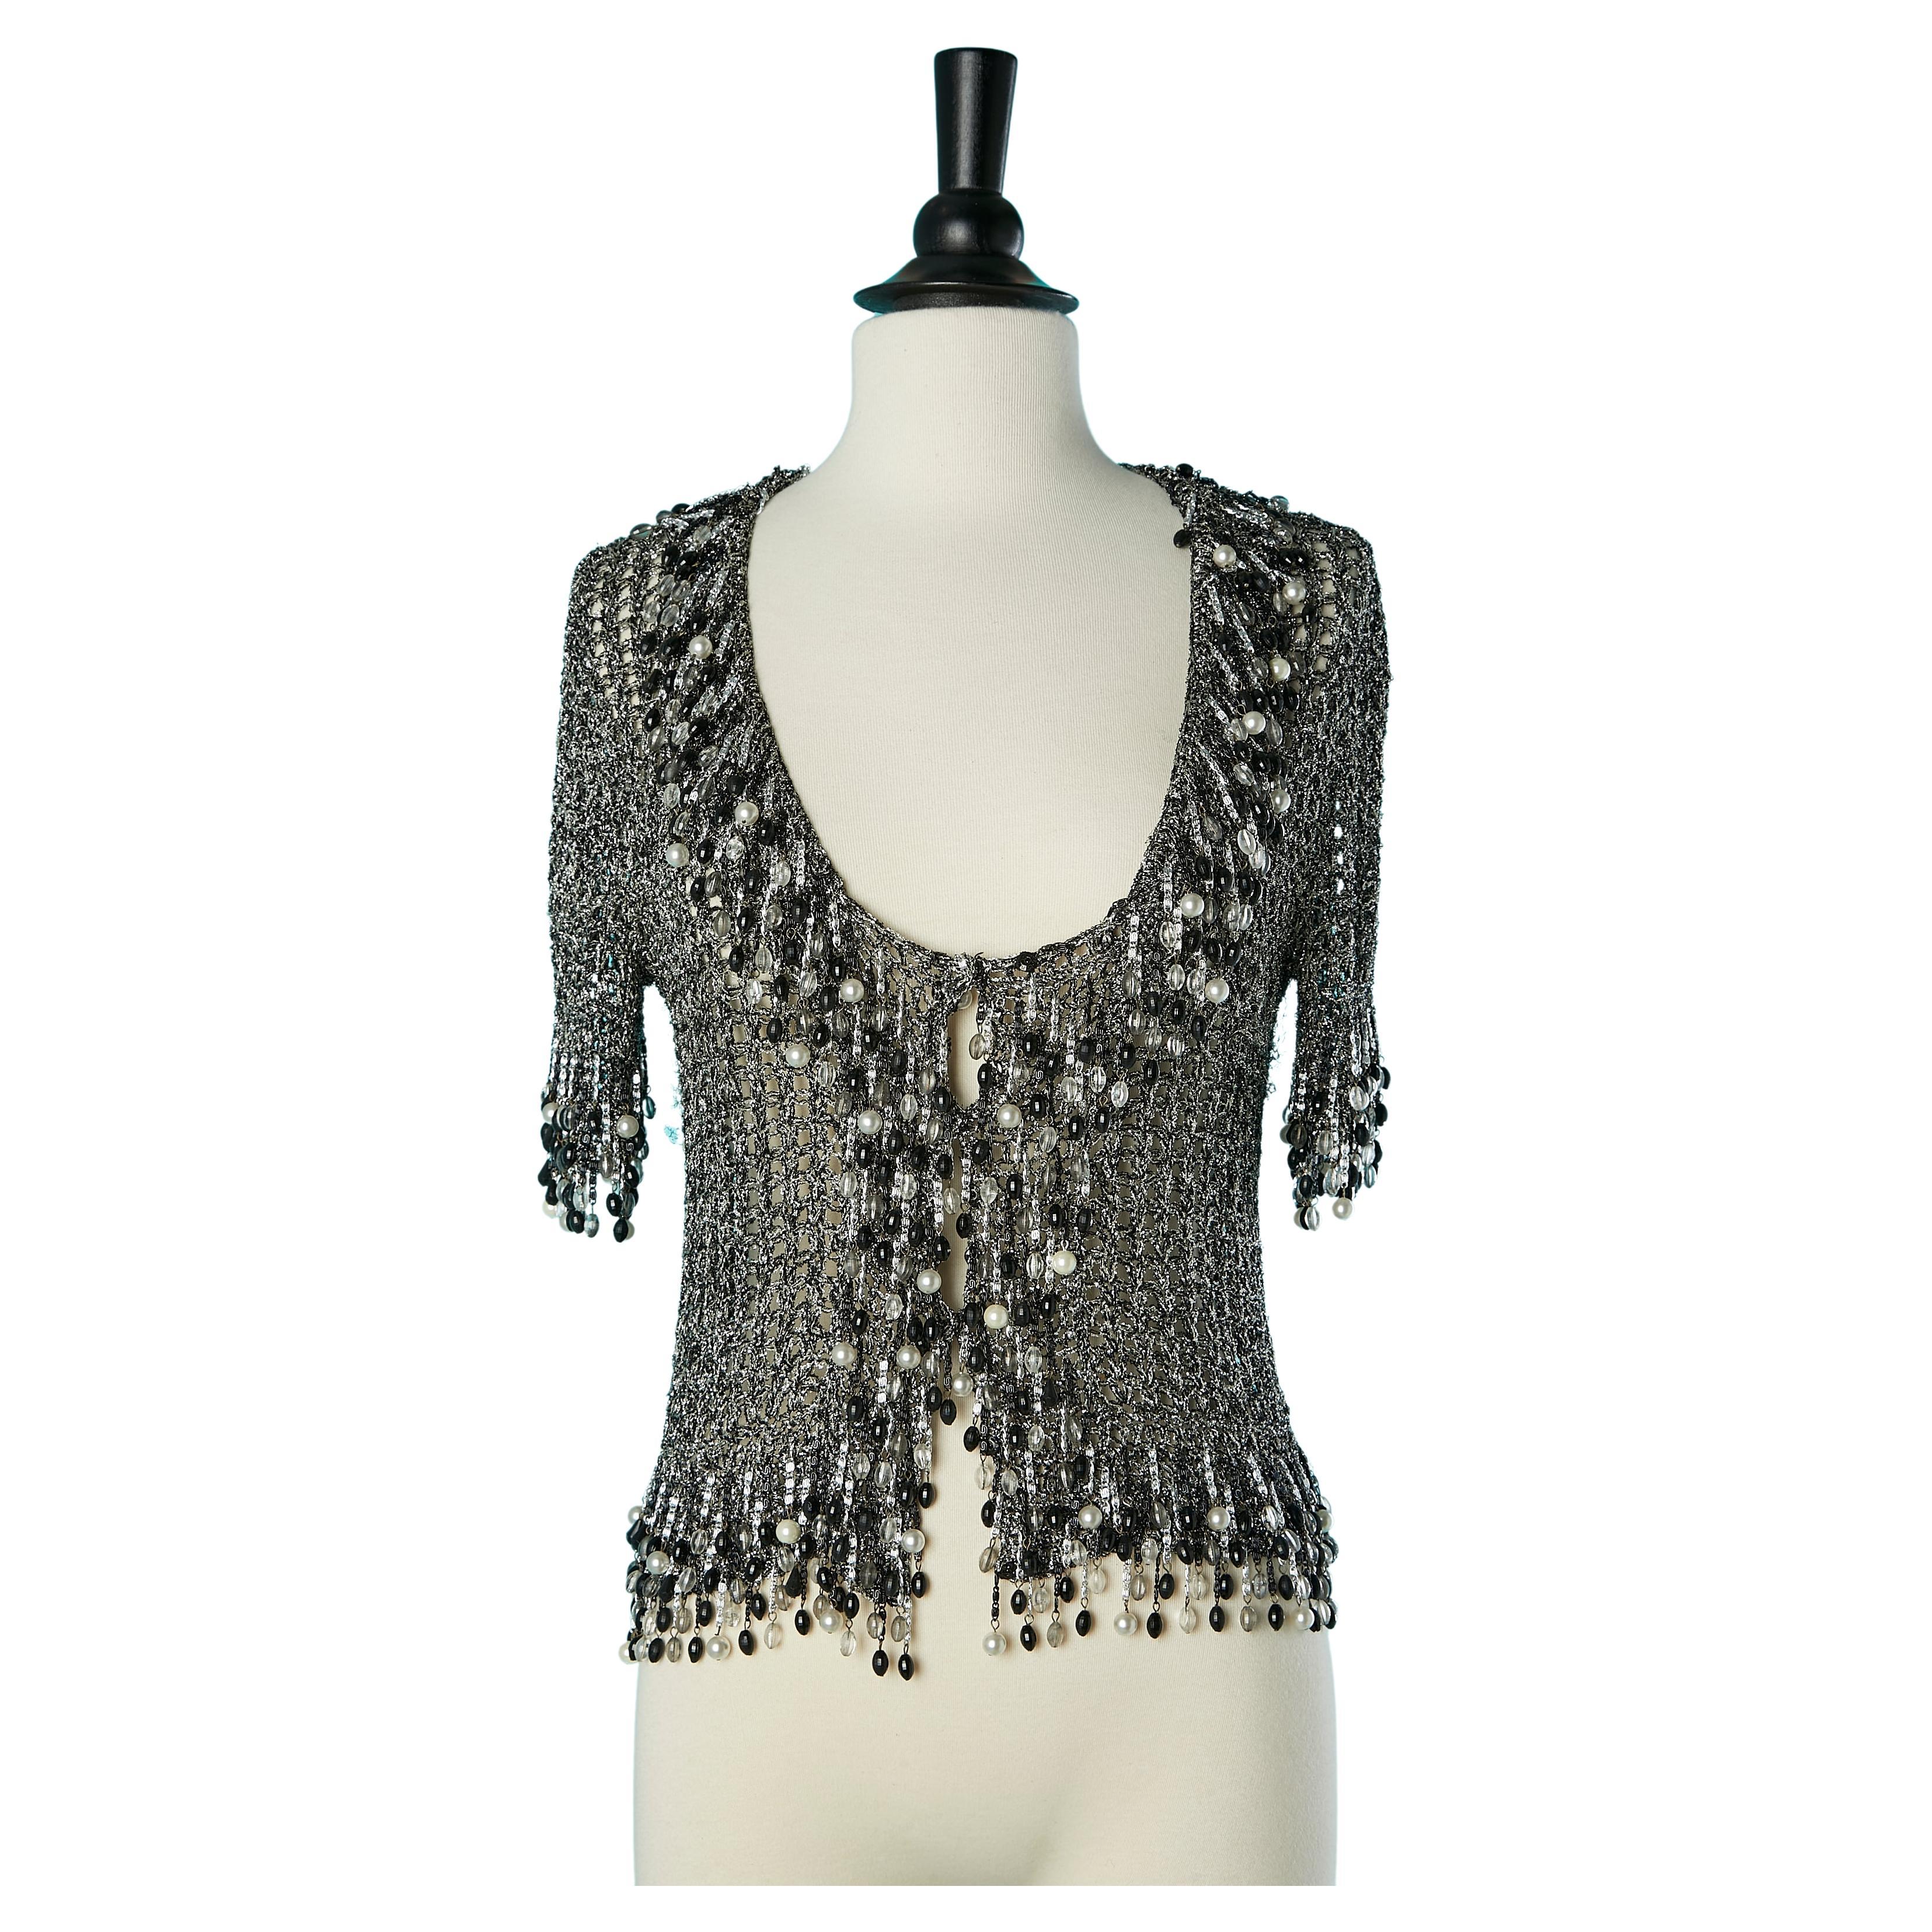 Knit silver lurex cardigan with beaded edge and chains Loris Azzaro Paris 